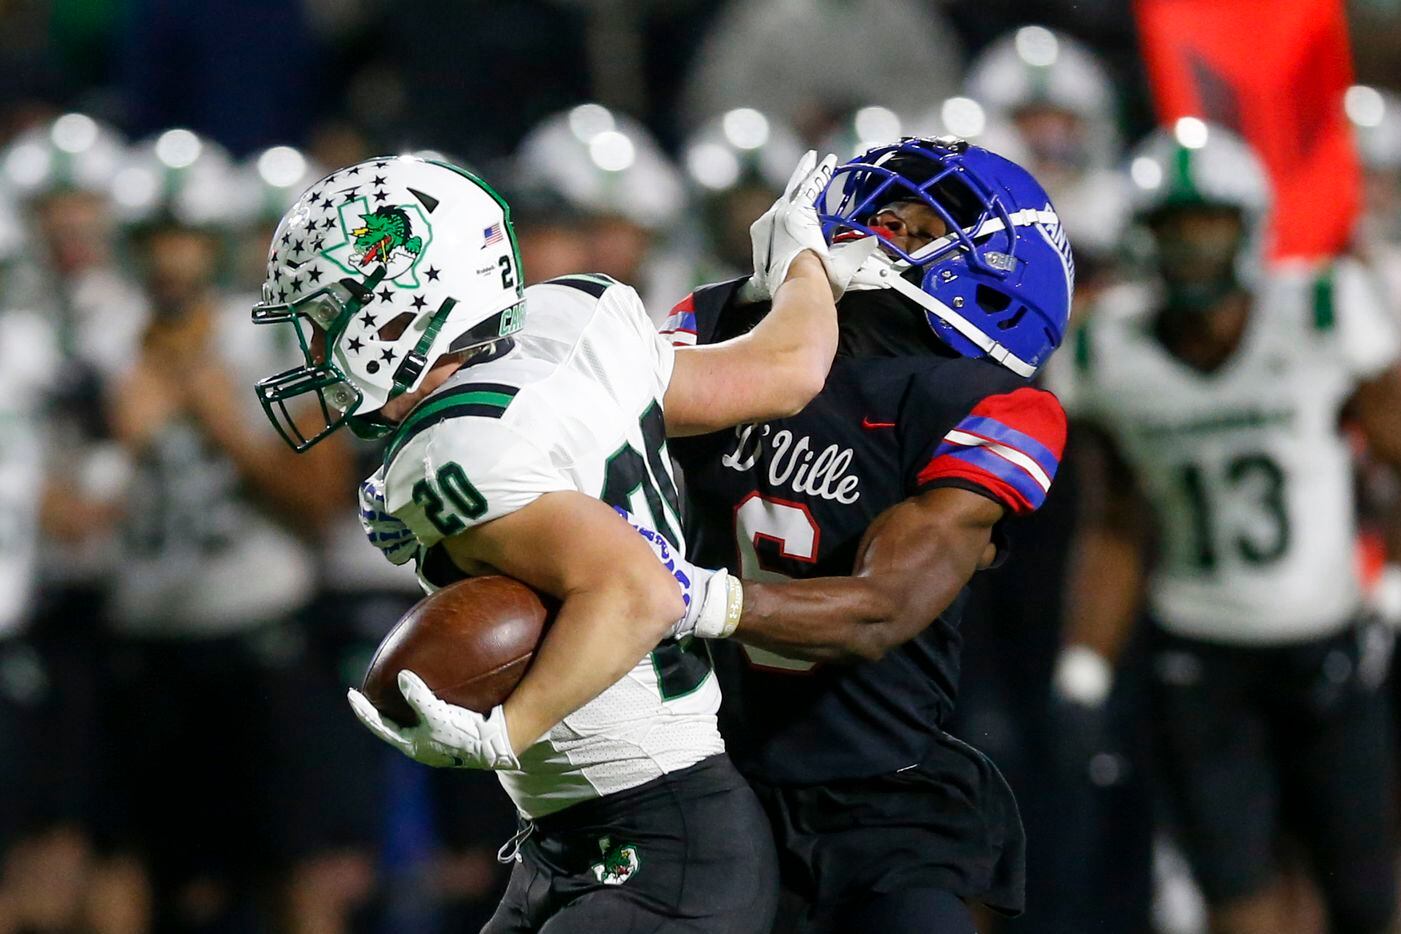 Duncanville’s Da’Myrion Coleman (6) tackles Southlake Carroll running back Zeke Zvonecek (20) during the second half of their Class 6A Division I state semifinal playoff game at McKinney ISD Stadium in McKinney, Texas, Saturday, Dec. 11, 2021. Duncanville defeated Southlake Carroll 35-9. (Elias Valverde II/The Dallas Morning News)